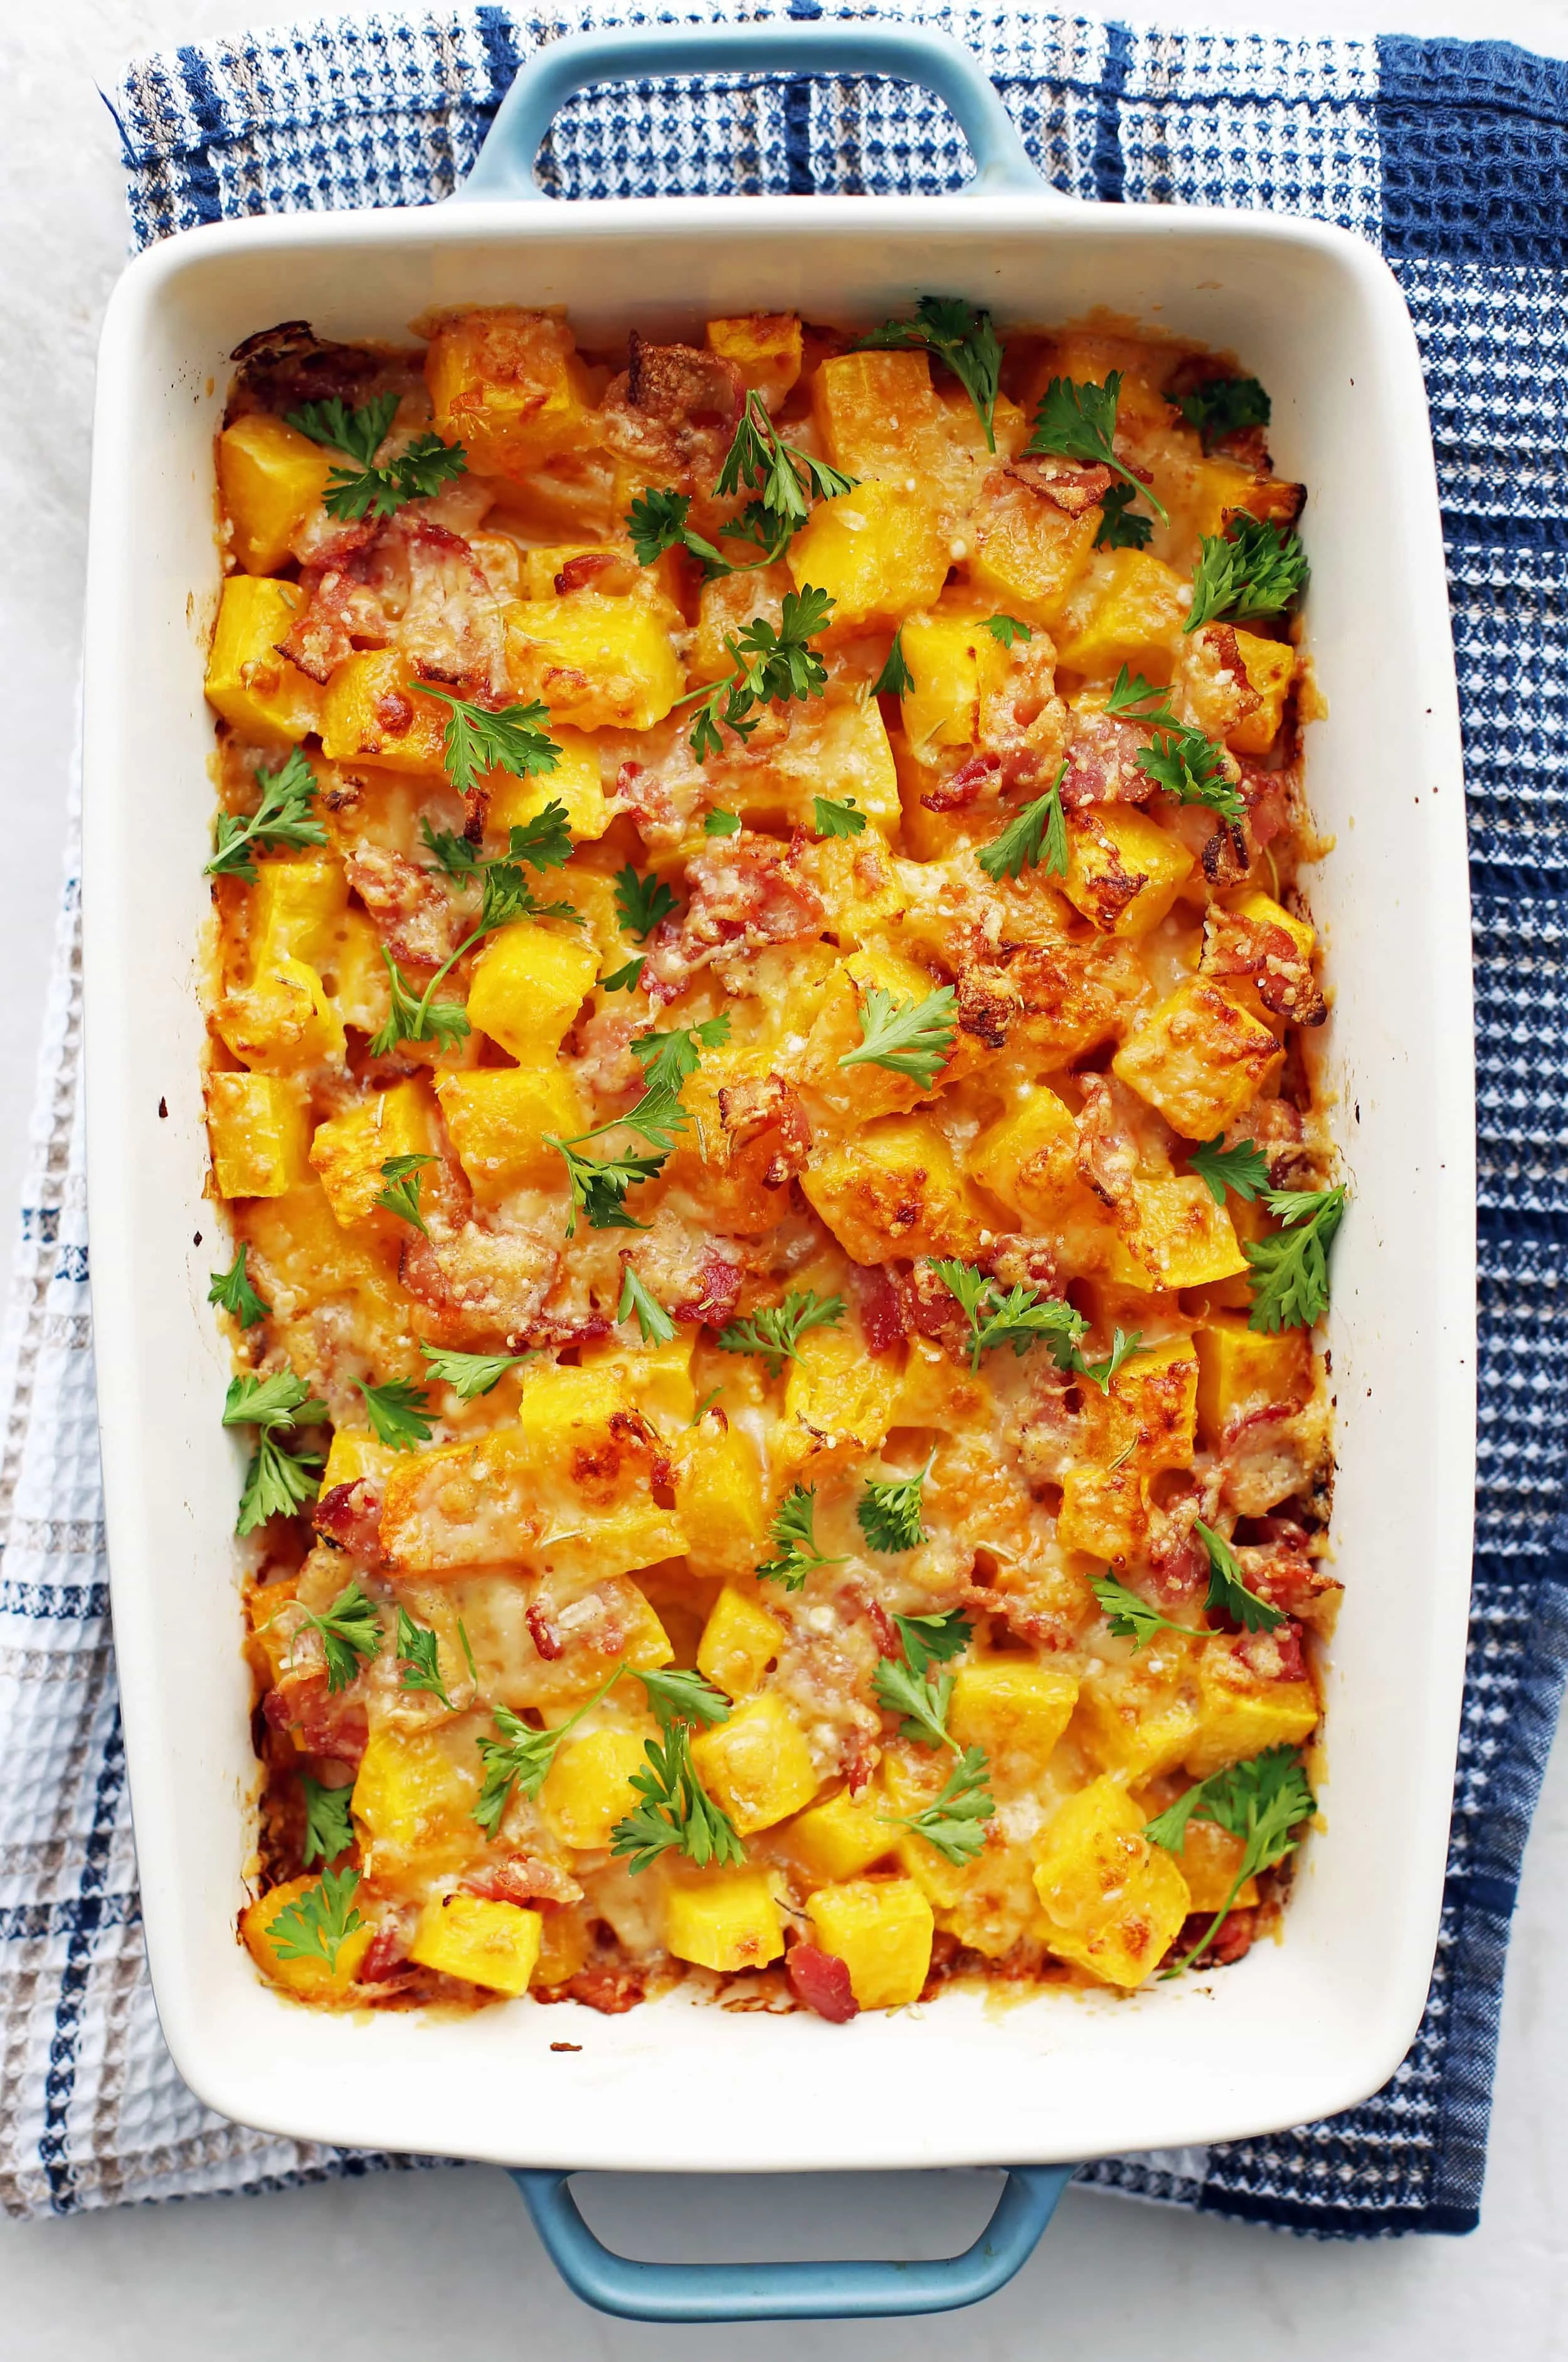 Baked Bacon Cheese Butternut Squash garnished with parsley in a large baking dish.